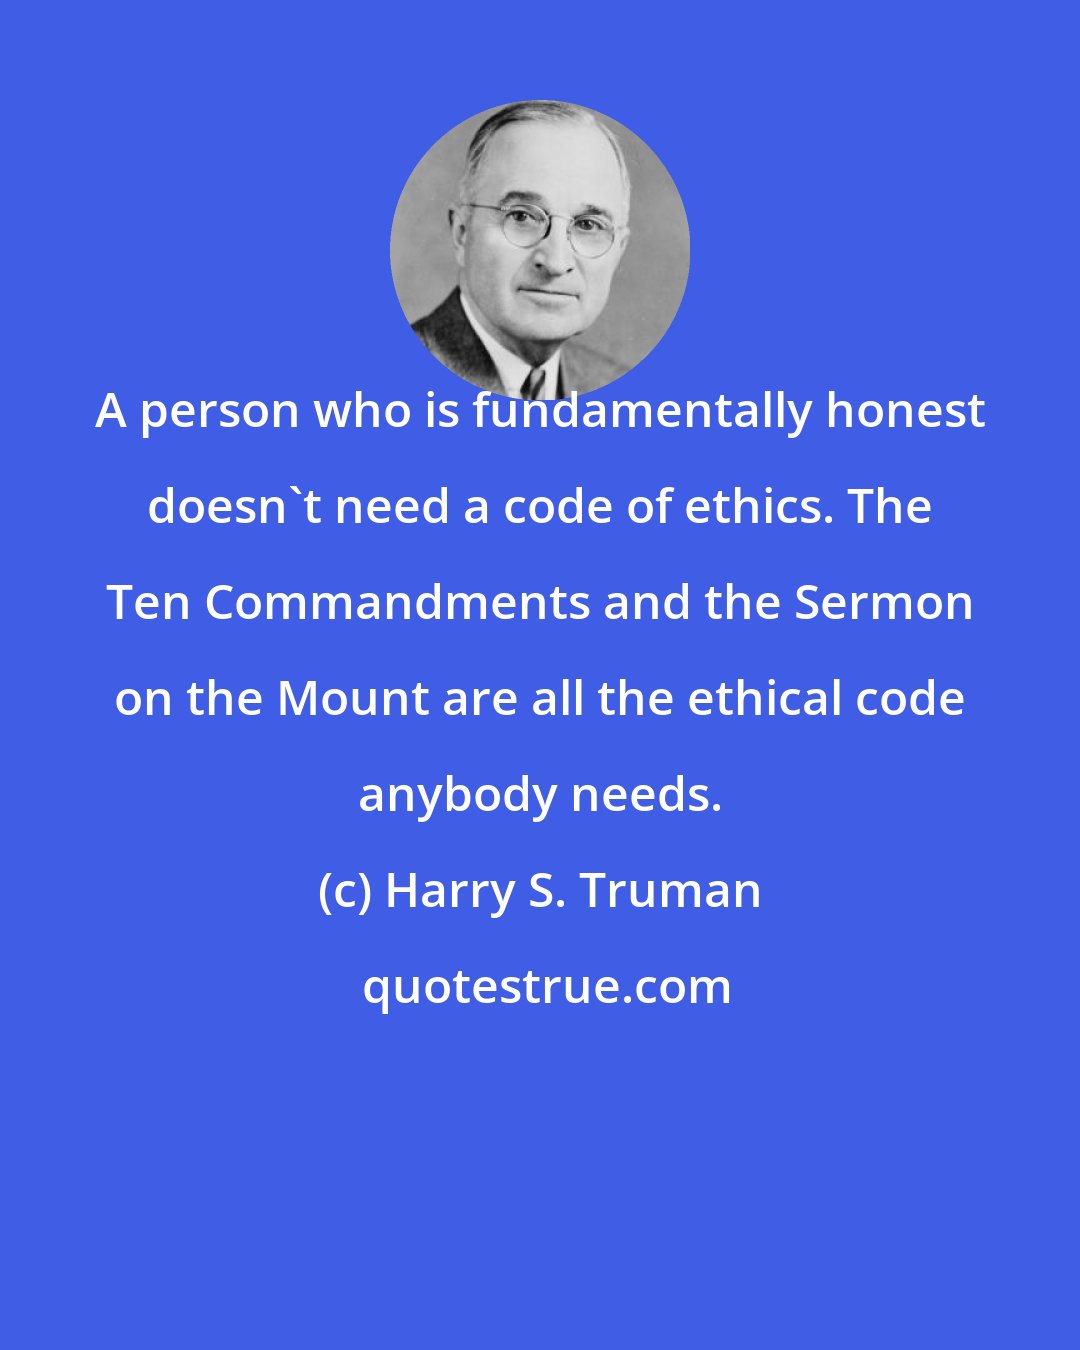 Harry S. Truman: A person who is fundamentally honest doesn't need a code of ethics. The Ten Commandments and the Sermon on the Mount are all the ethical code anybody needs.